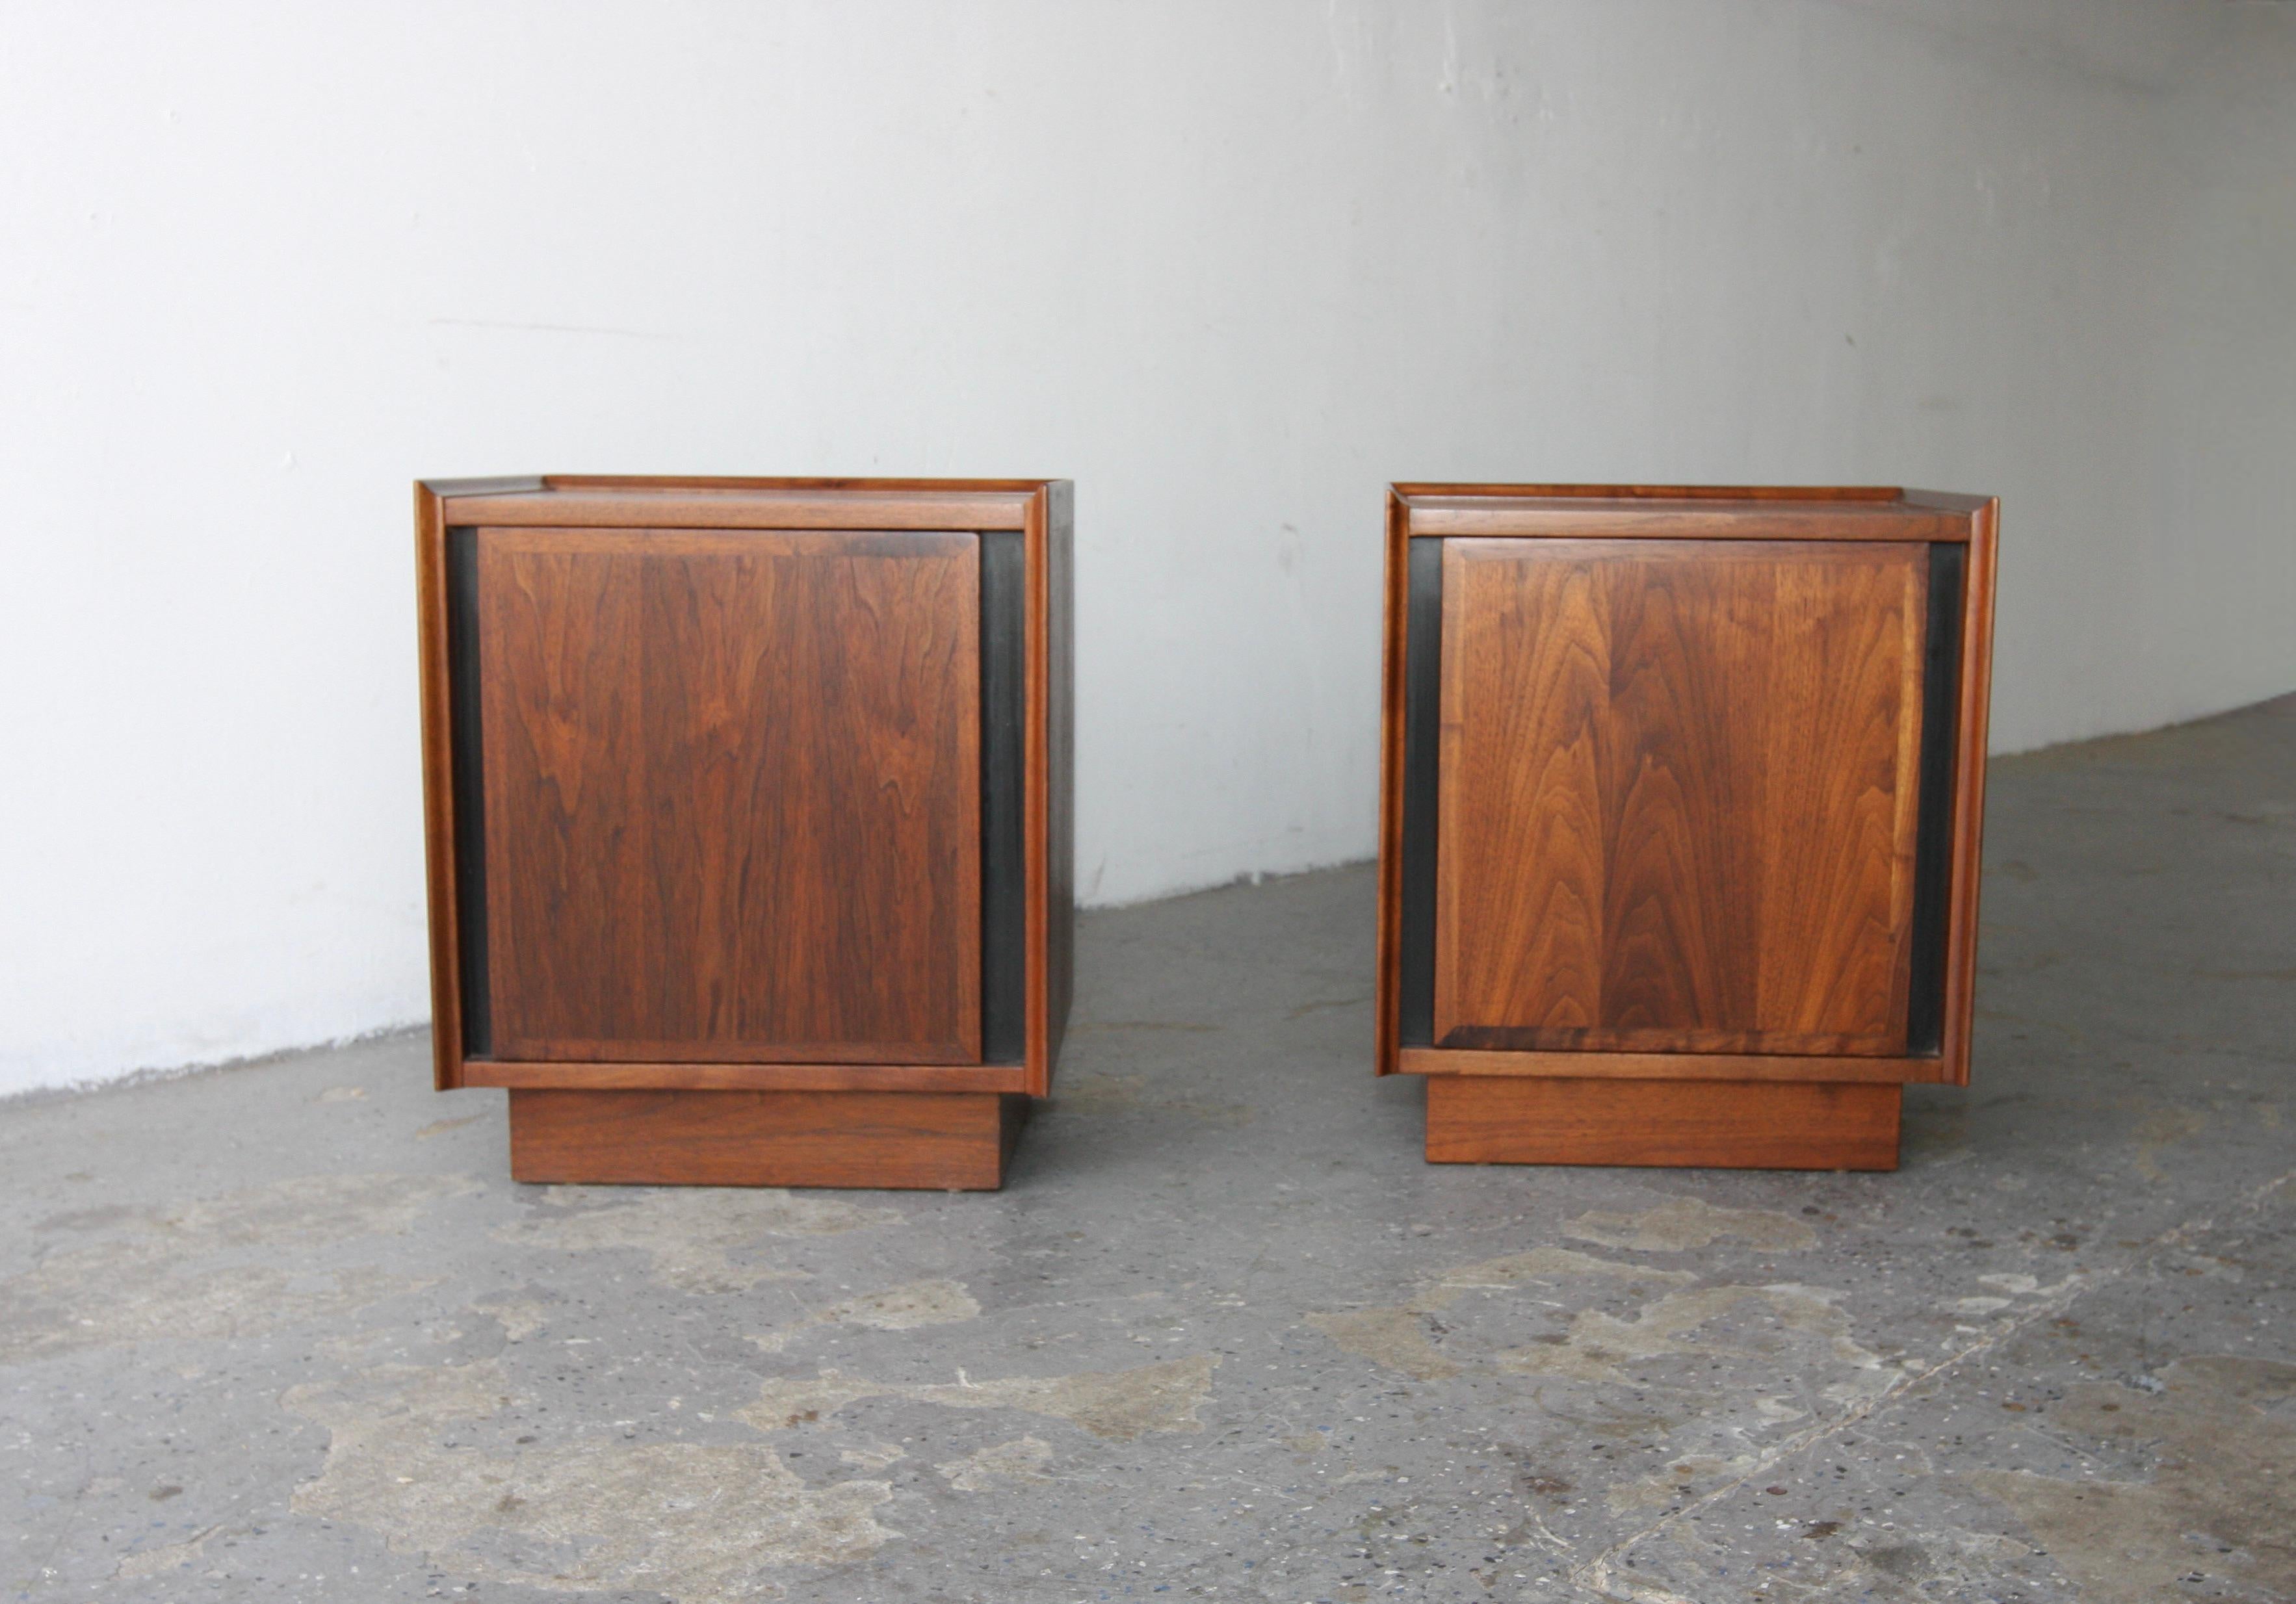 We are very pleased to offer a pair of mid-century nightstands by Merton Gershun for Dillingham as part of the 